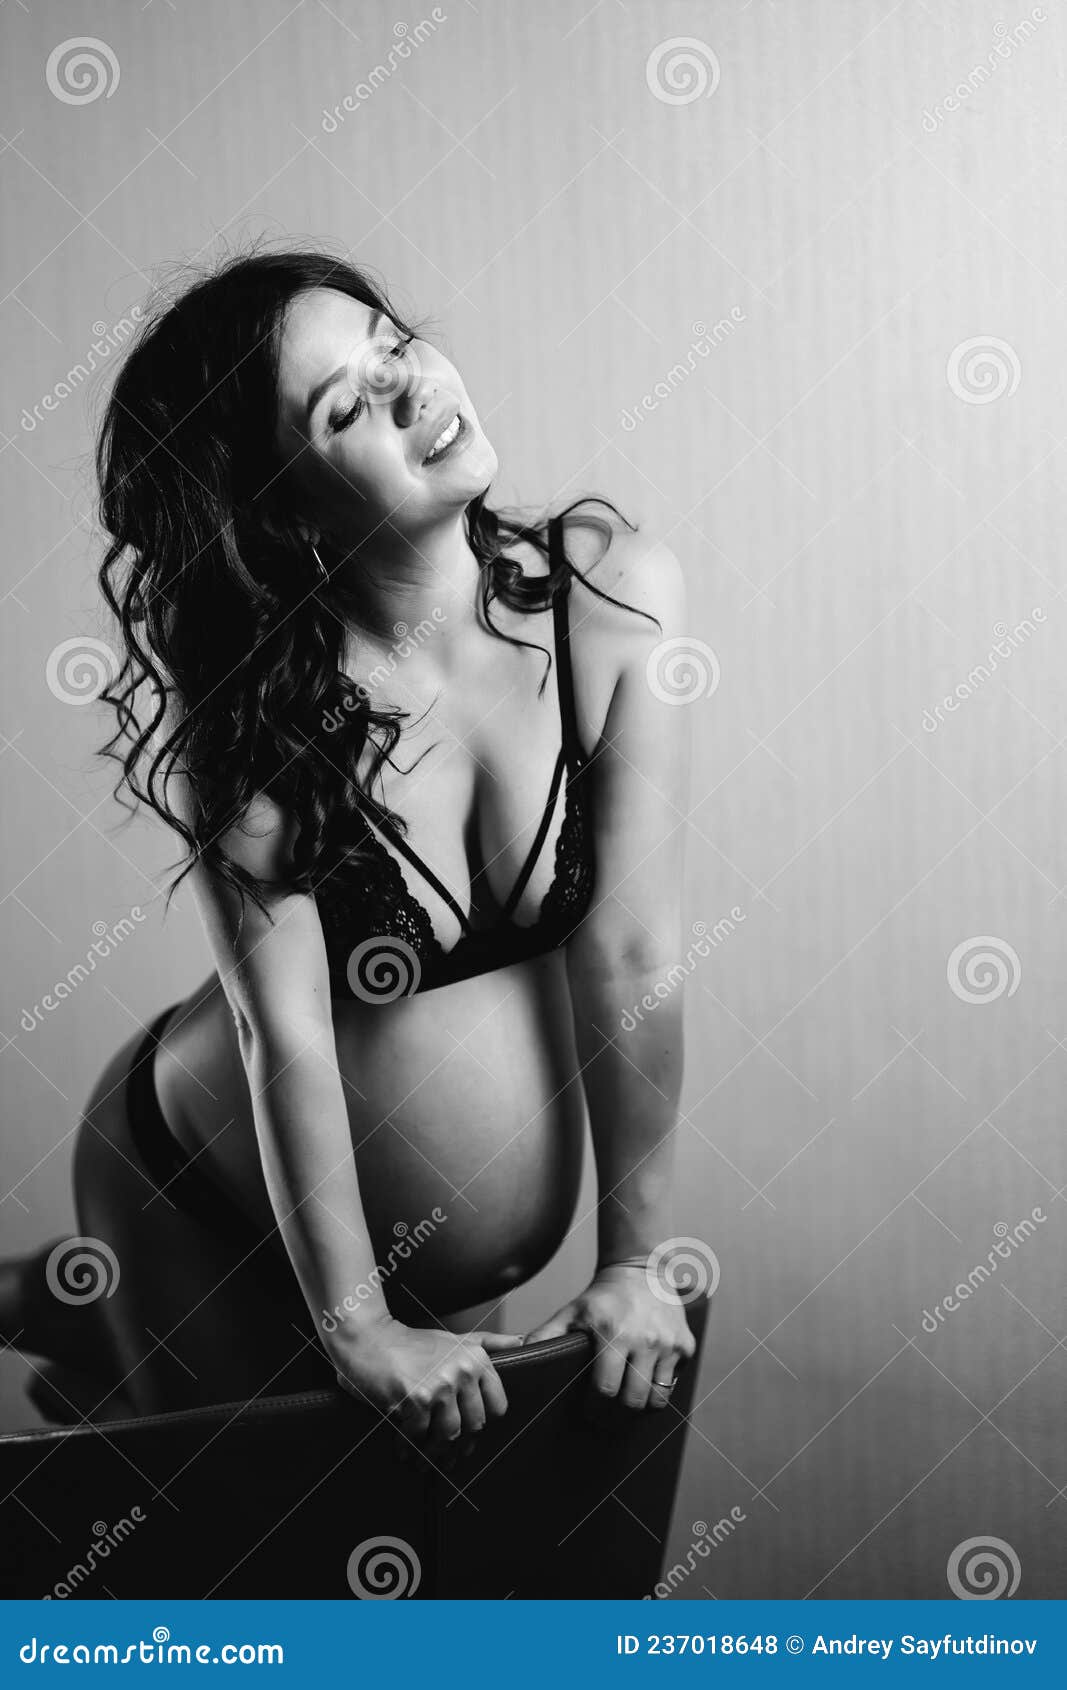 Beautiful young woman in underwear on grey background :: Stock Photography  Agency :: Pixel-Shot Studio